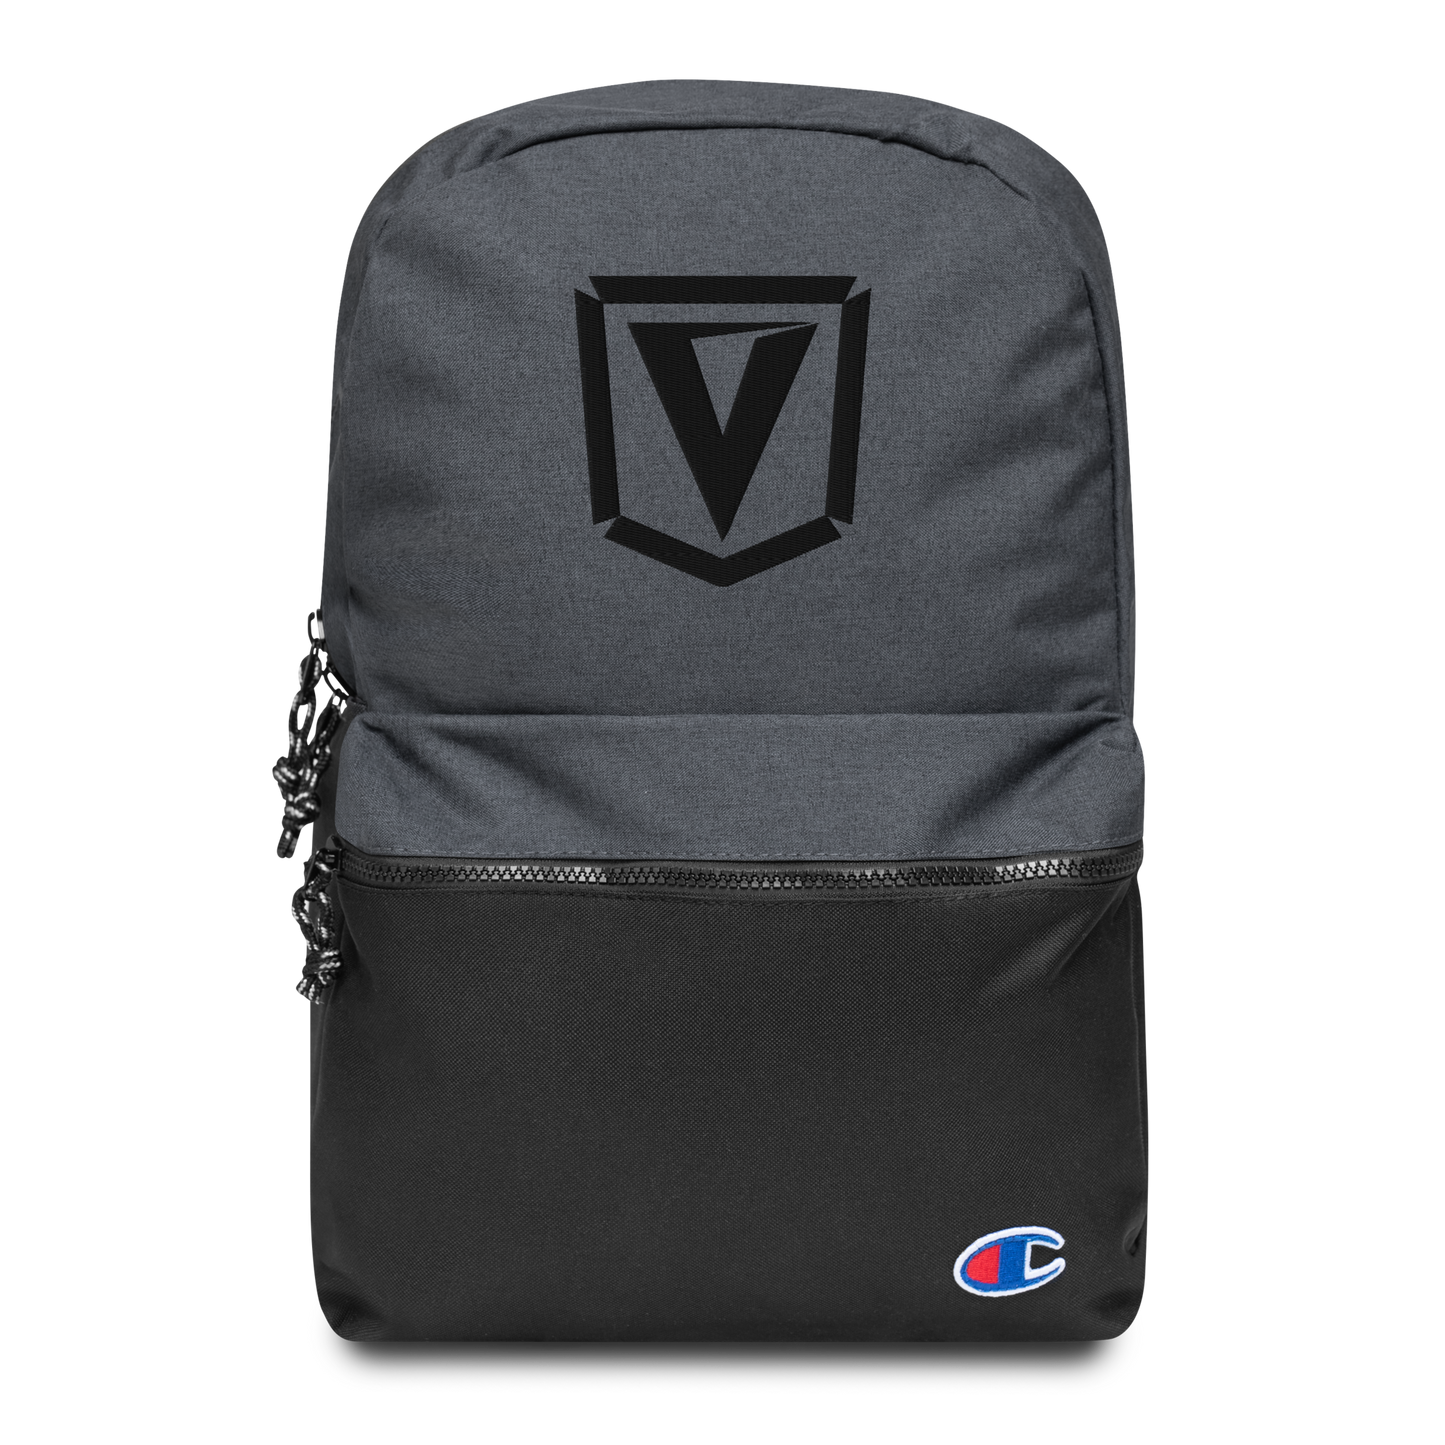 "The Symbol" - Variant/Champion Backpack